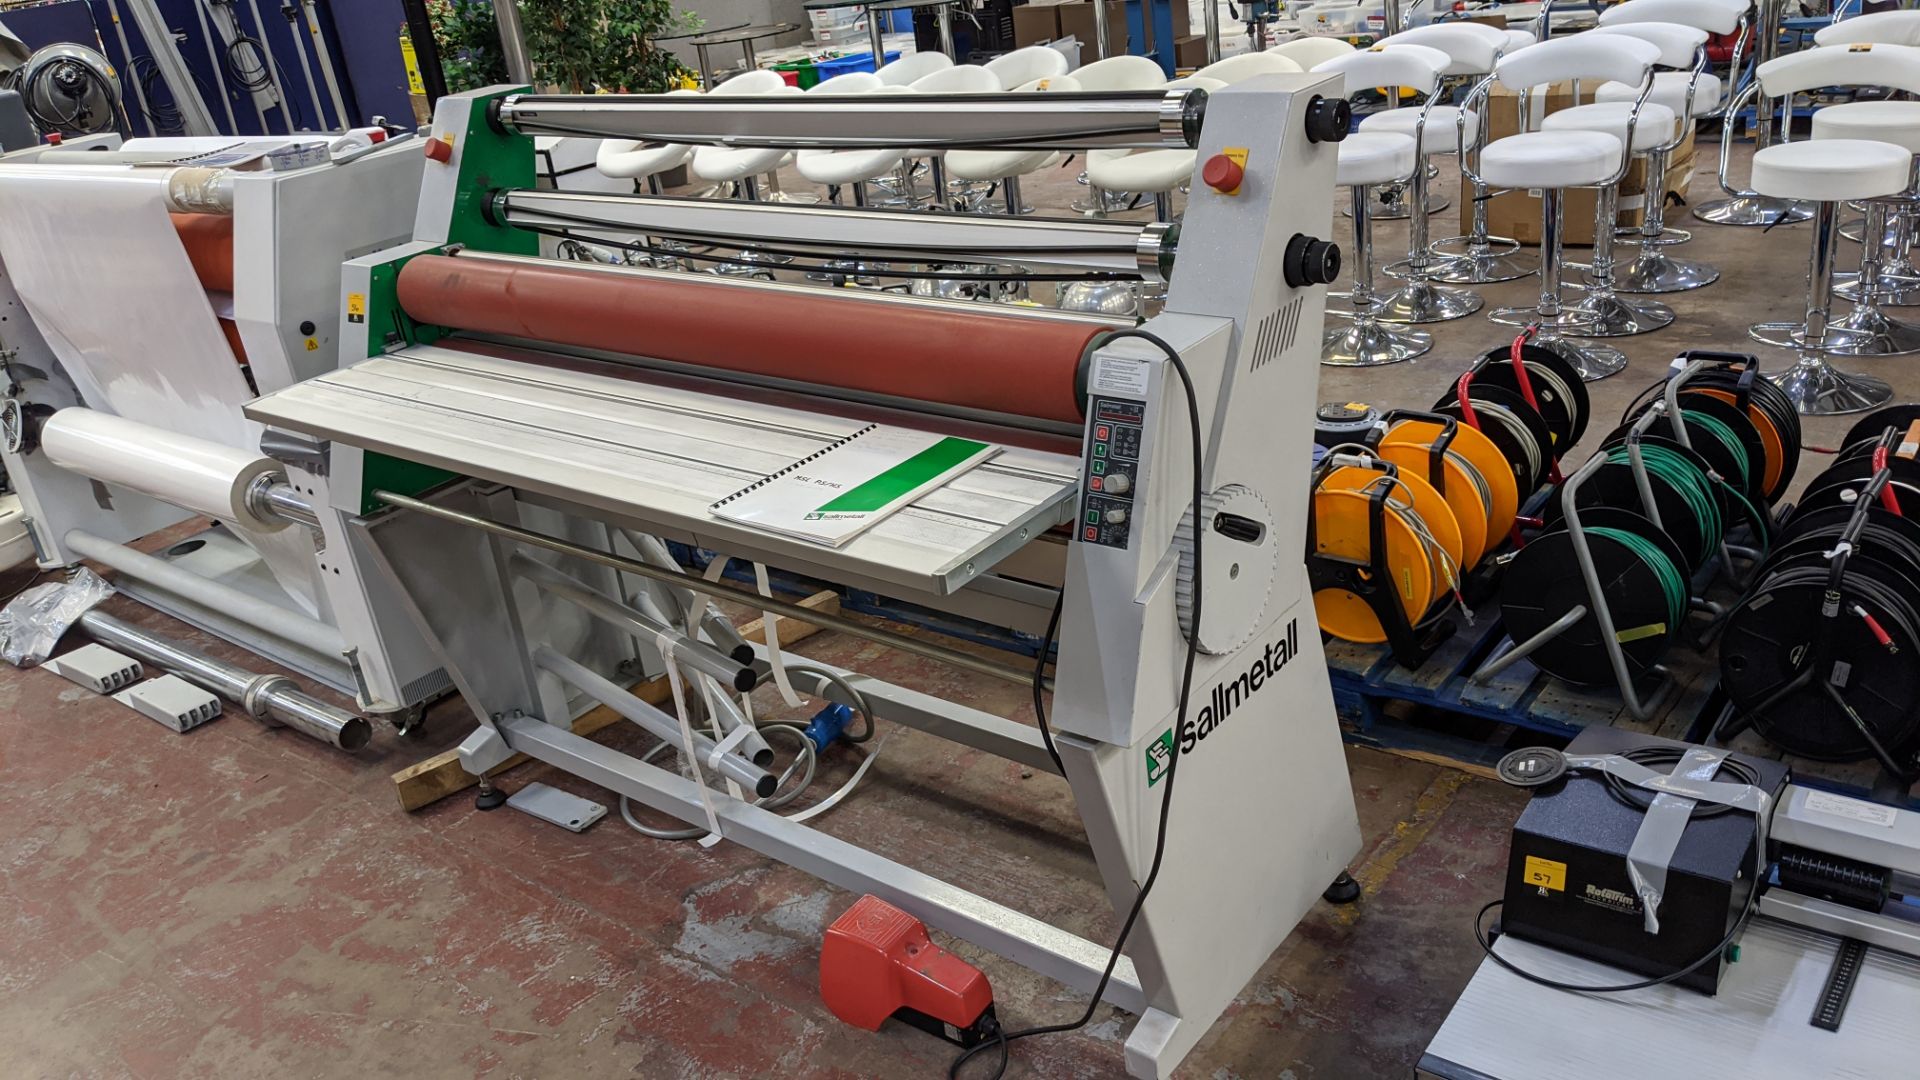 Sallmetall Multi-System laminator Lots 51 - 480 comprise the total assets of Mills Media Ltd in - Image 3 of 8